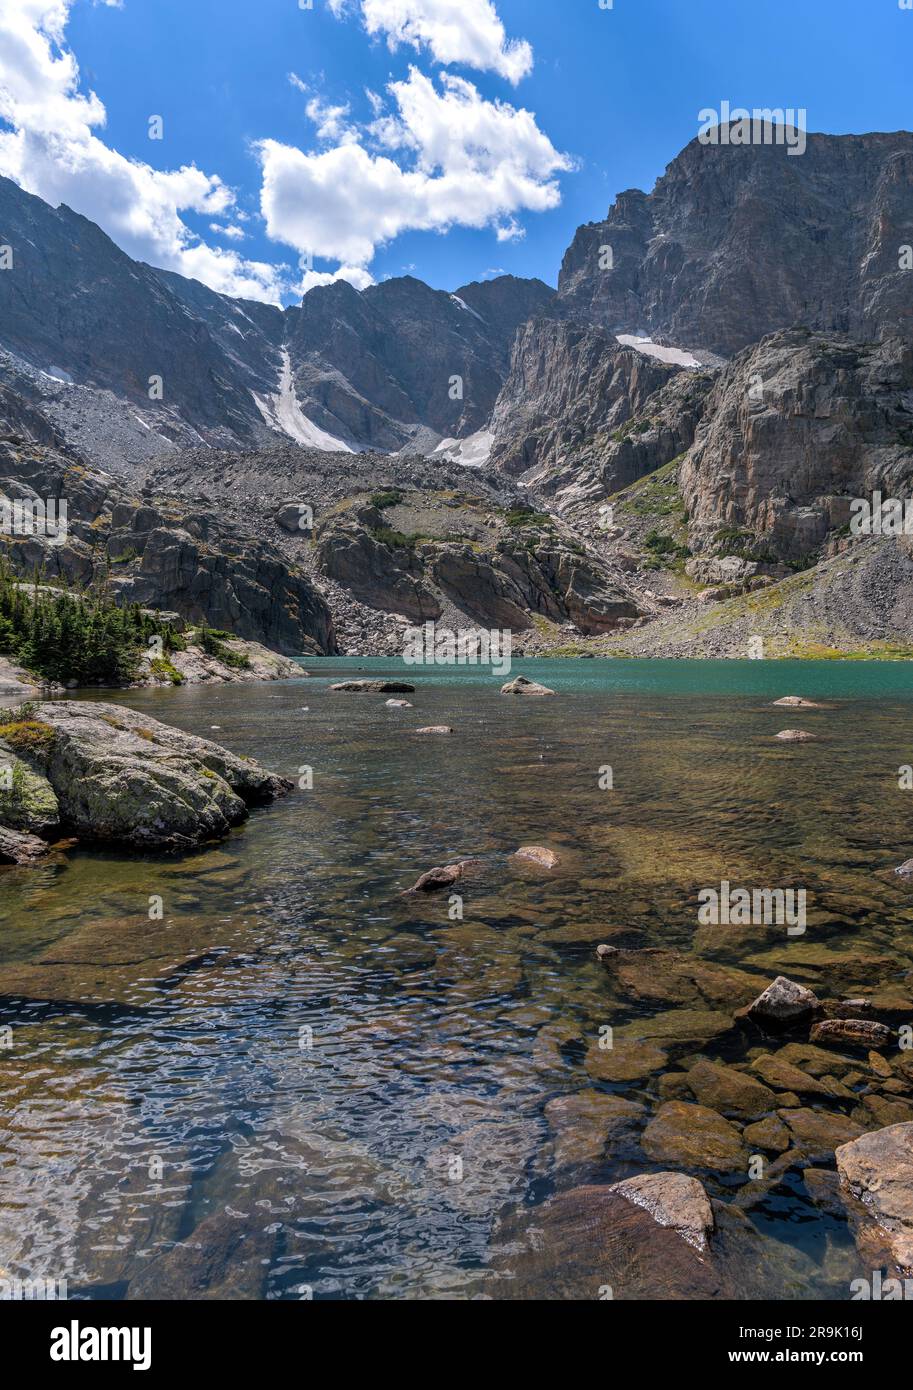 Sky Pond - A closeup view of a clear and colorful alpine lake - Sky Pond at base of Taylor Peak and Taylor Glacier on a sunny Summer day. RMNP, CO, US. Stock Photo